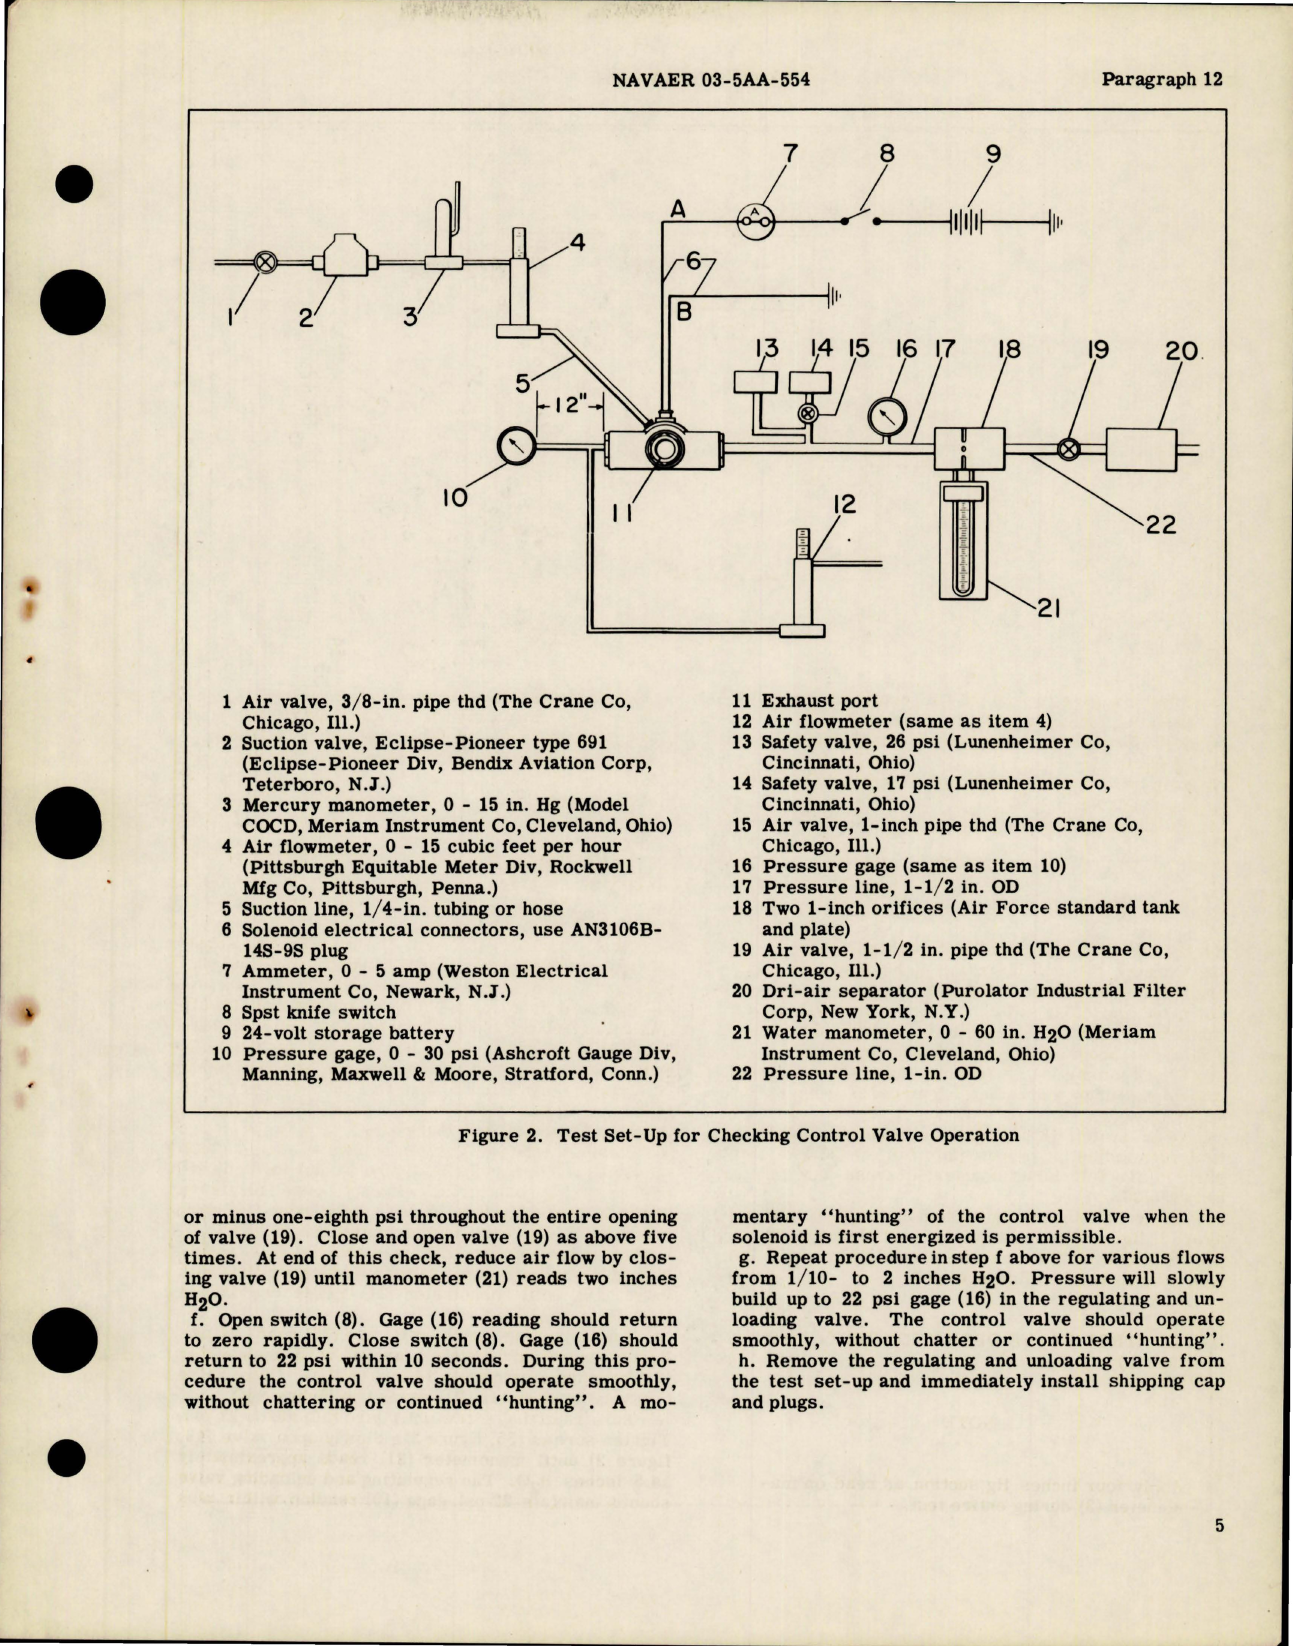 Sample page 5 from AirCorps Library document: Overhaul Instructions with Parts - Regulating and Unloading Valve - Type 38E05-1